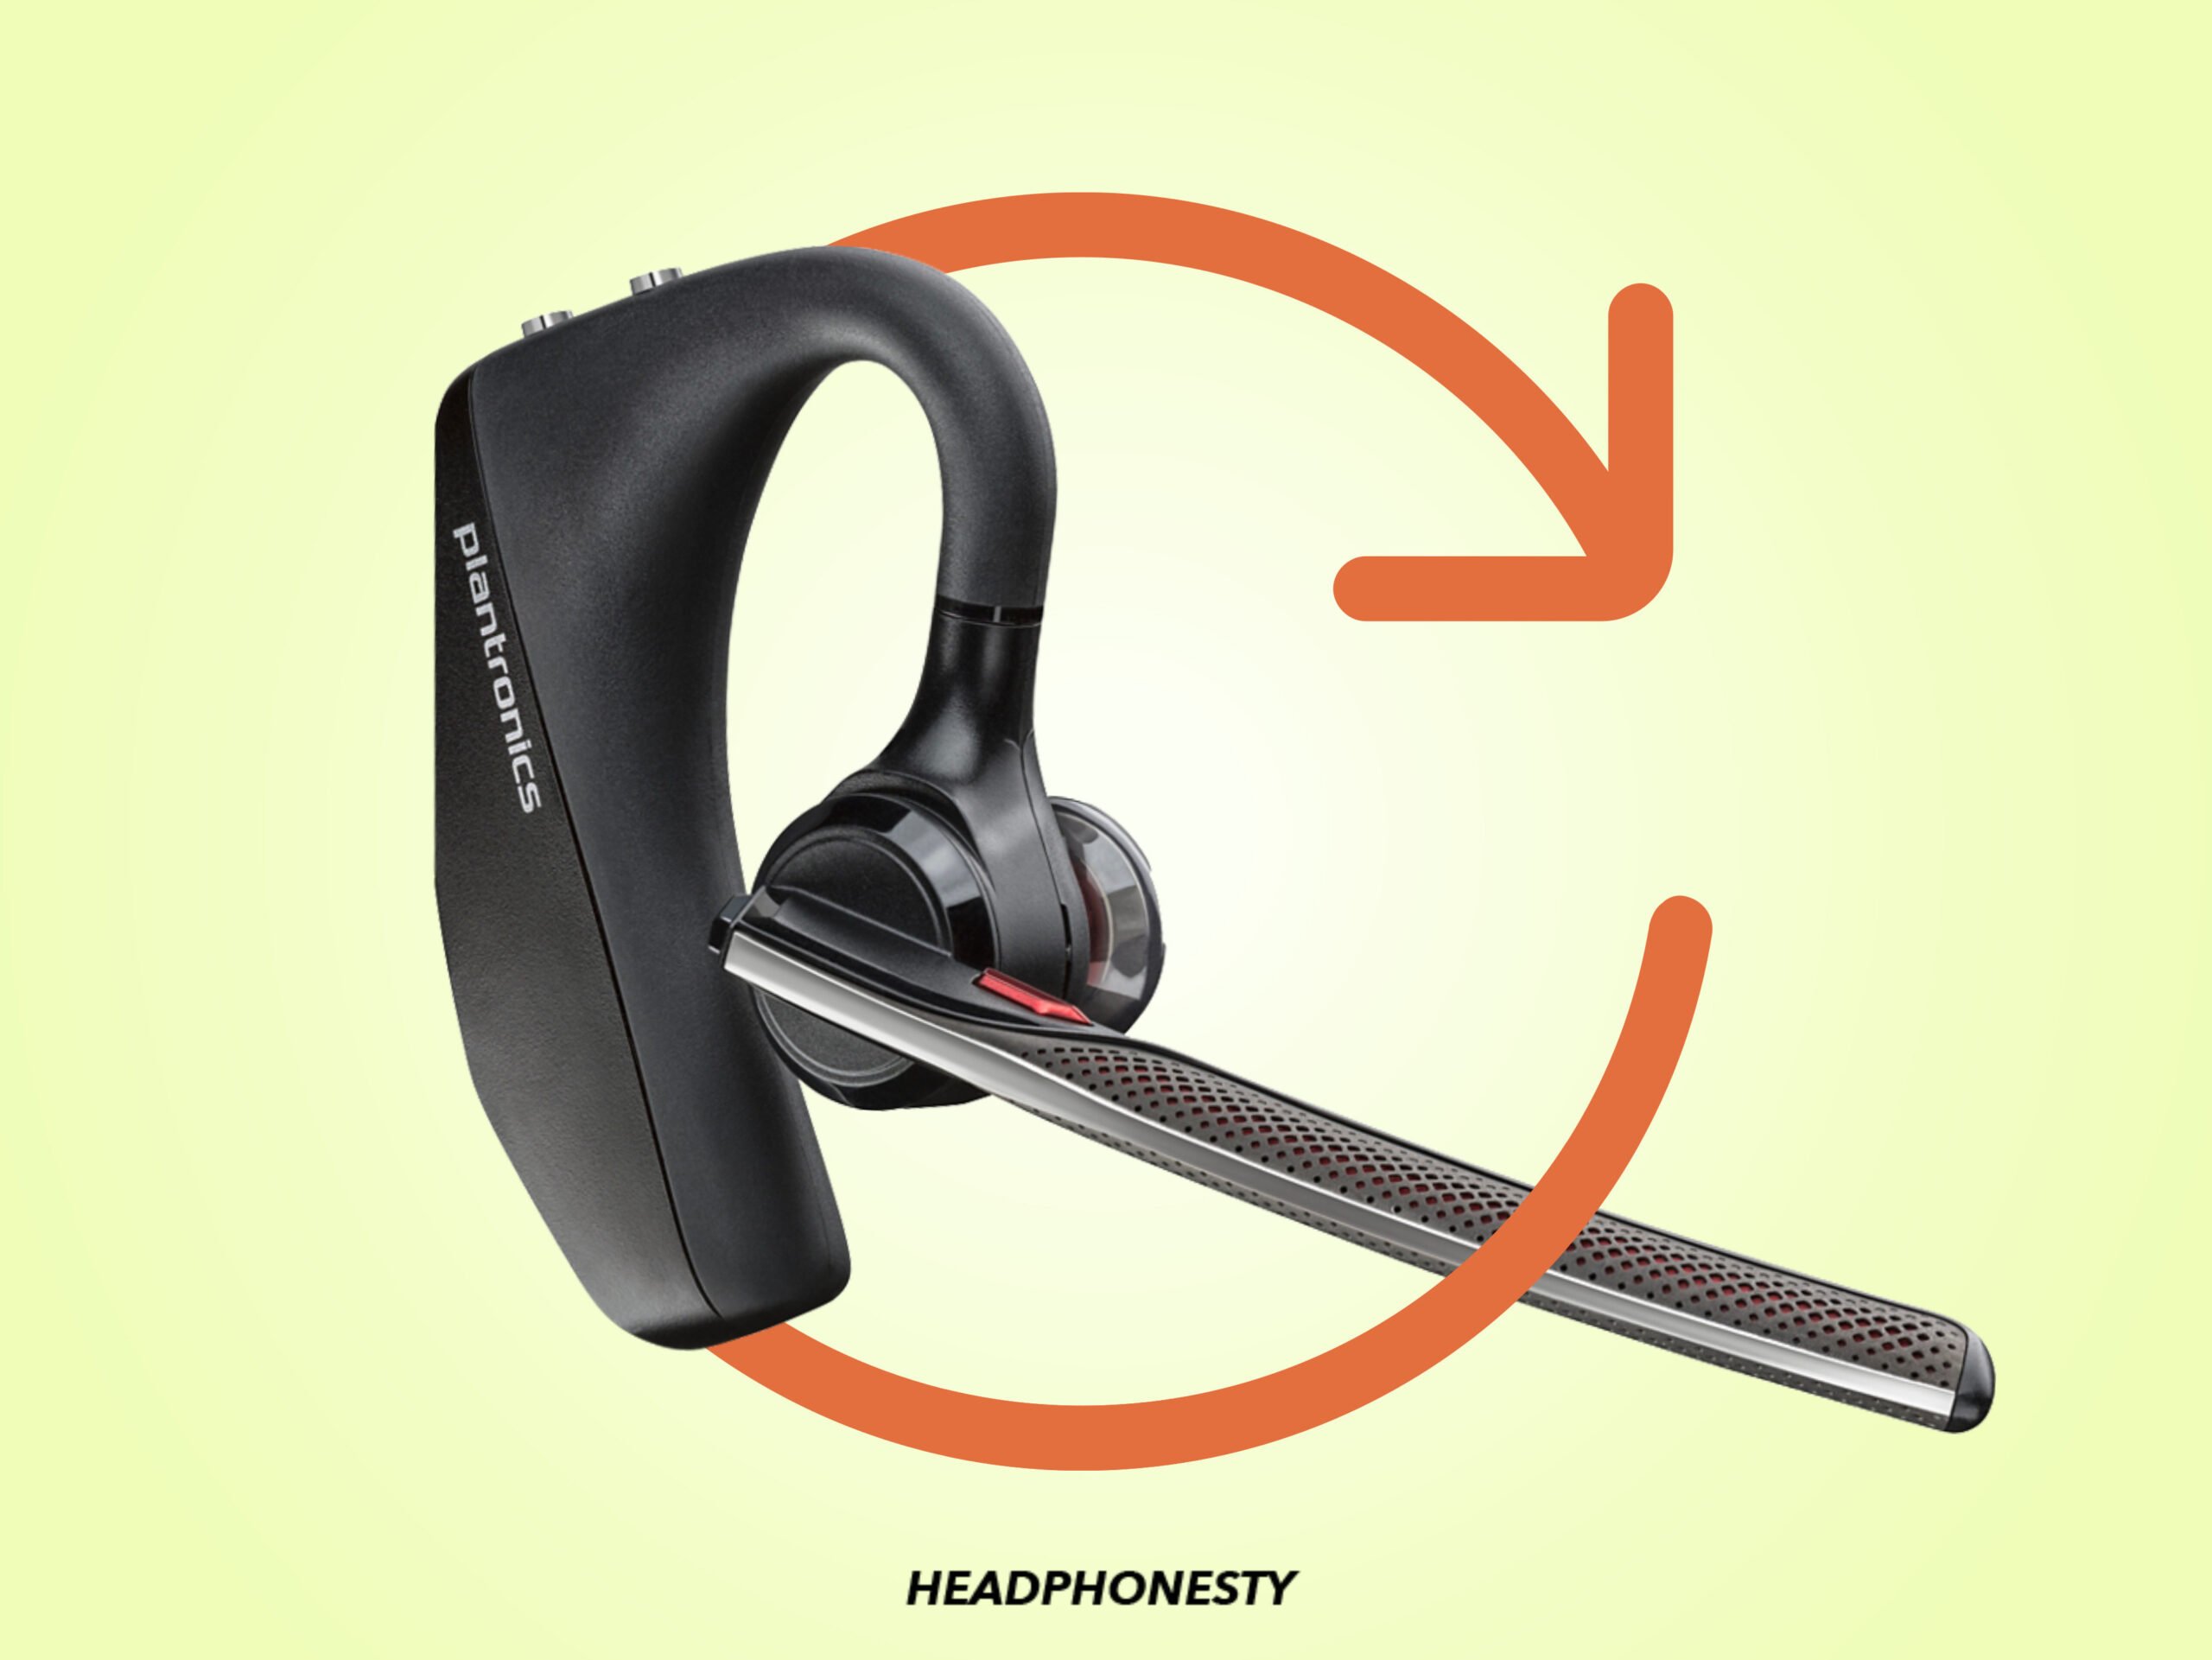 Resetting Plantronics (or Poly) headsets can be easy as 1, 2, 3!